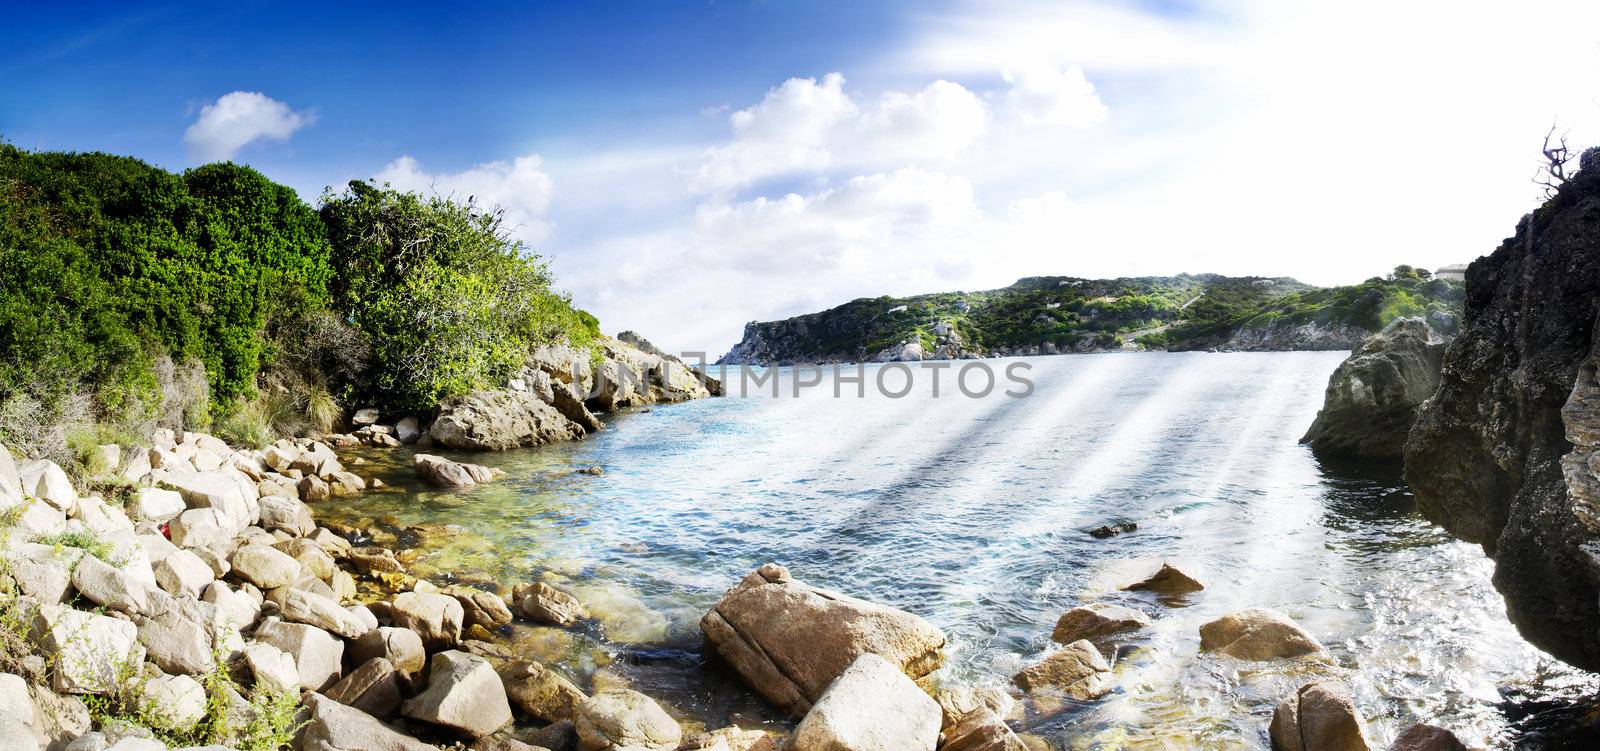 Beach surrounded by rocks with a blue sky. Panorama